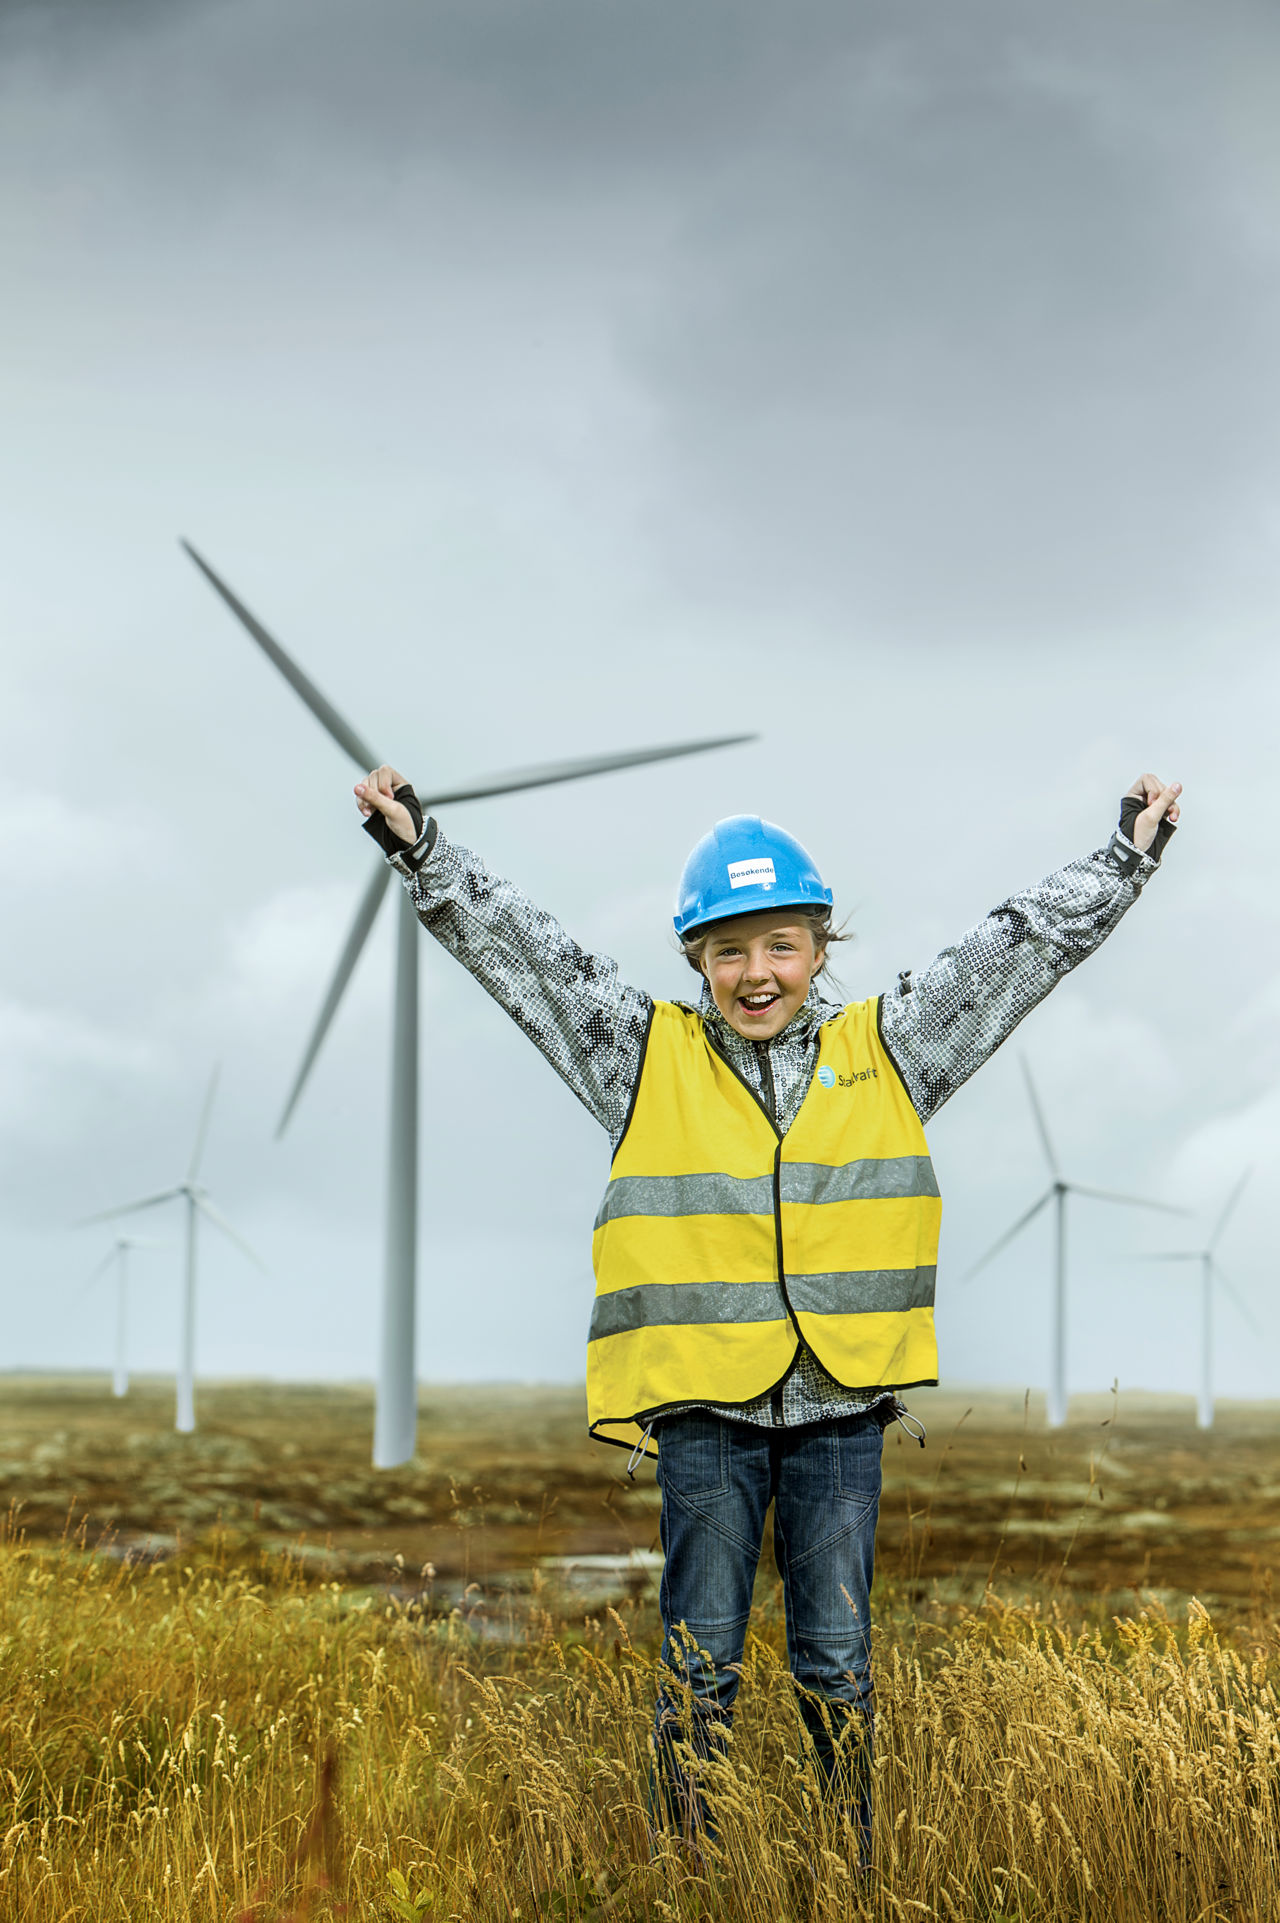 Girl cheering at wind farm with PPE on